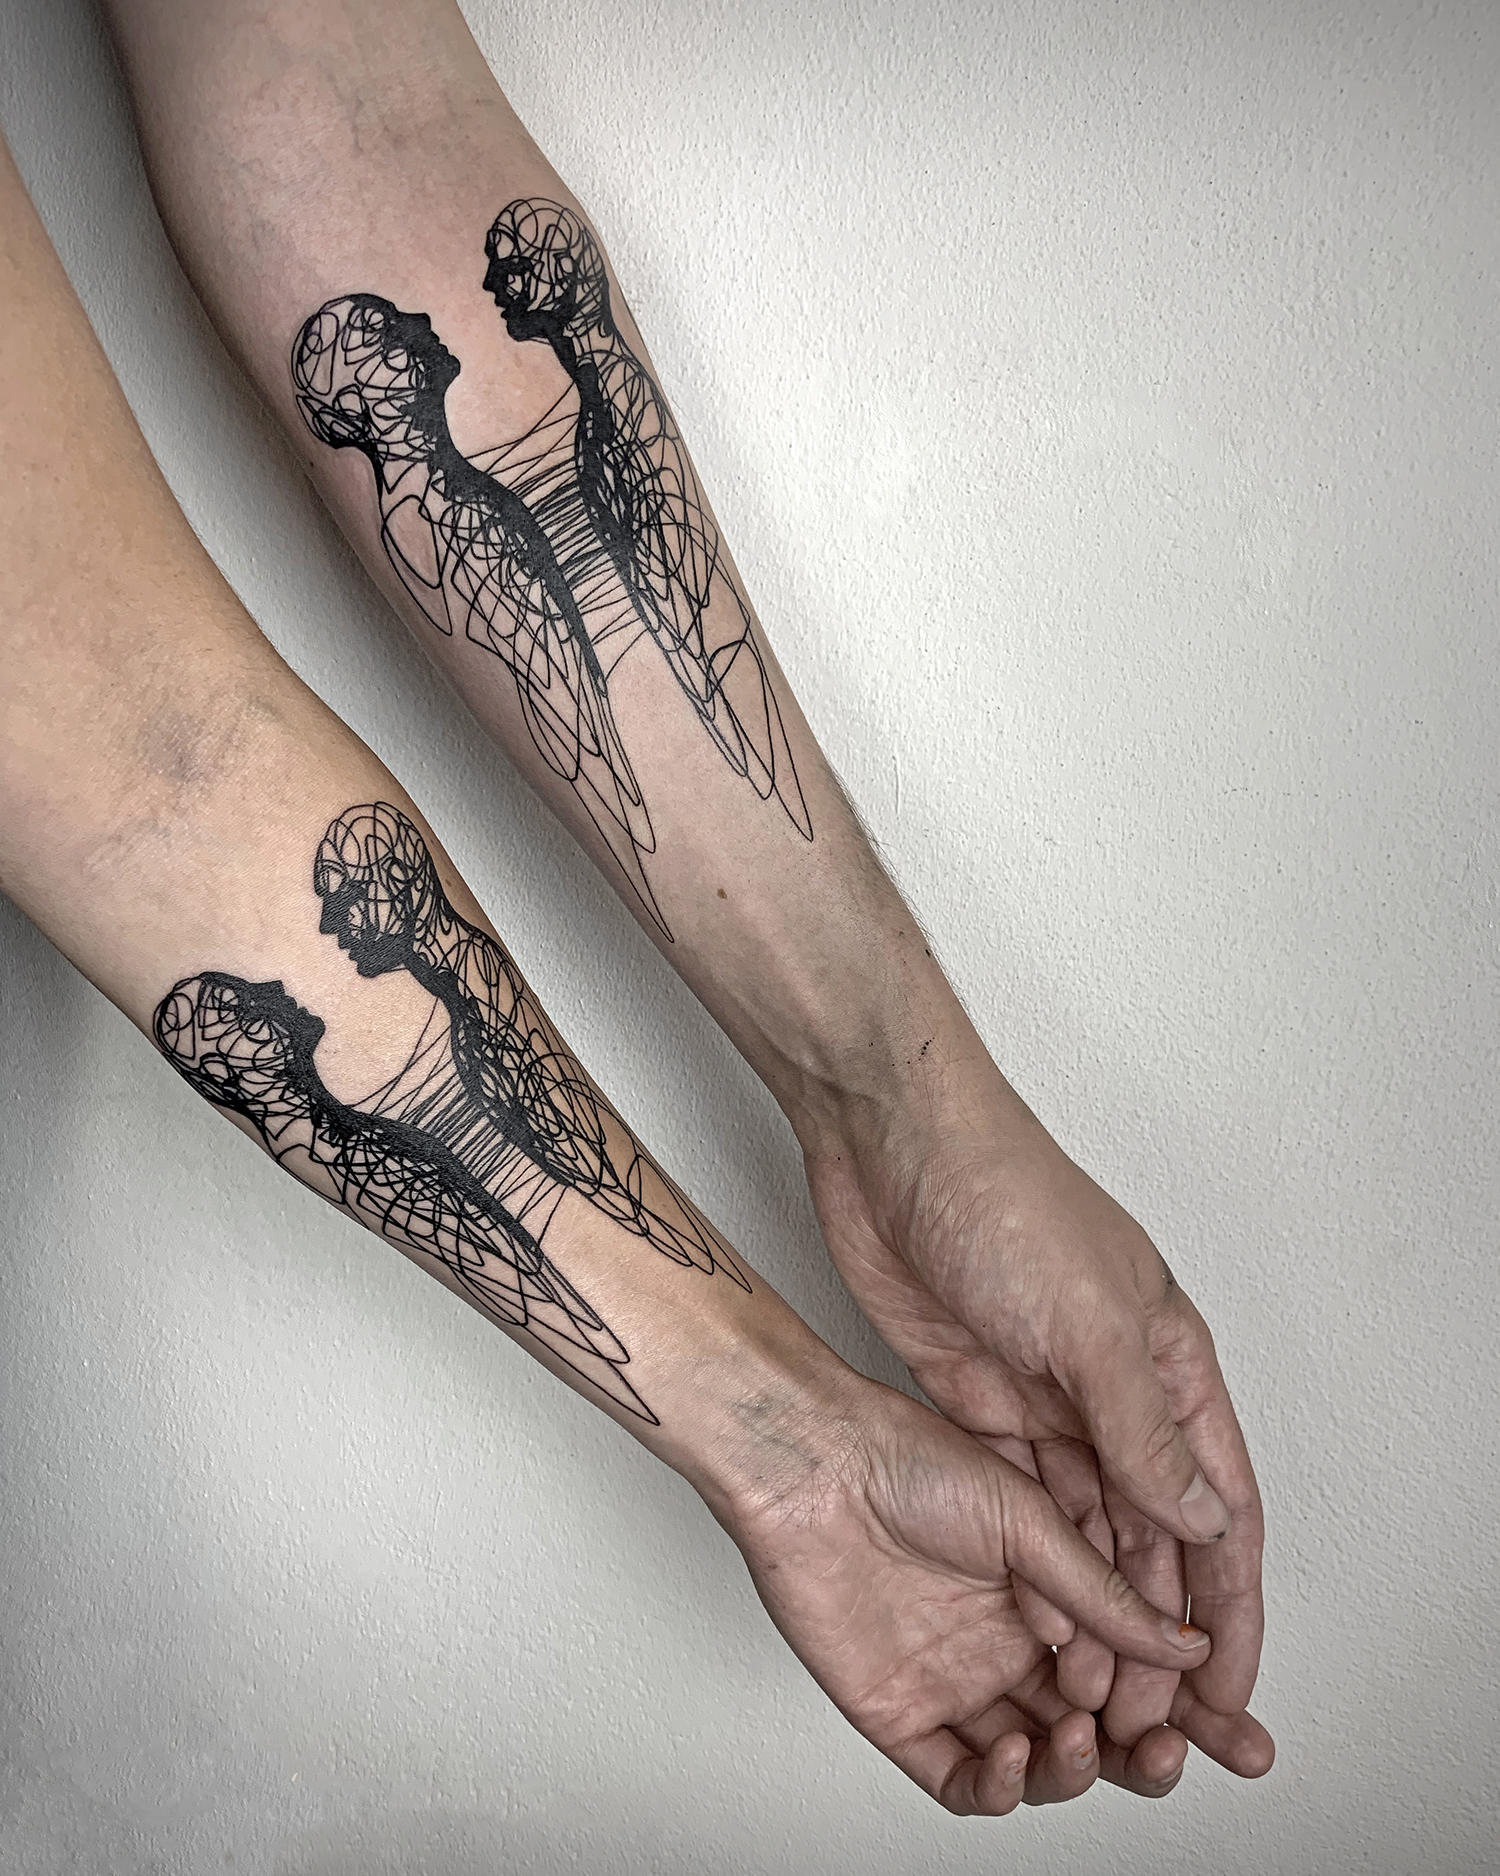 connection and understanding, linework tattoo